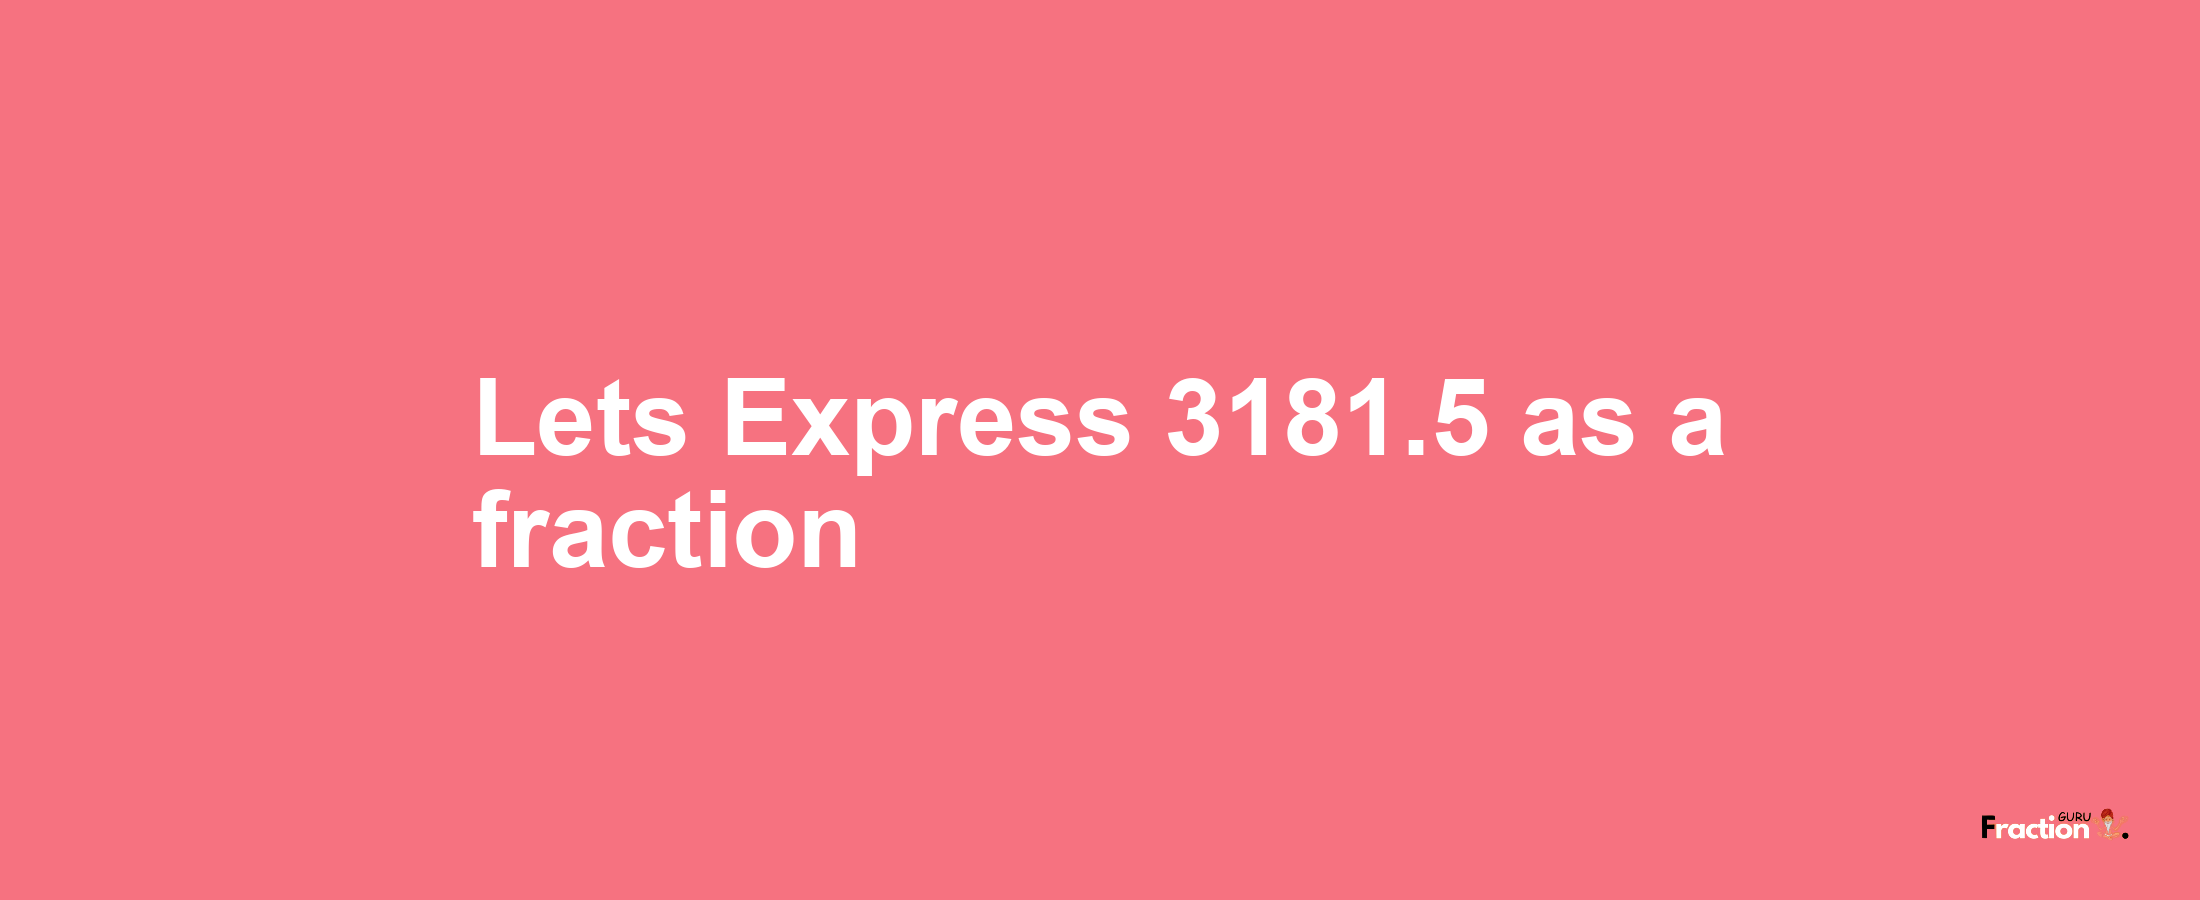 Lets Express 3181.5 as afraction